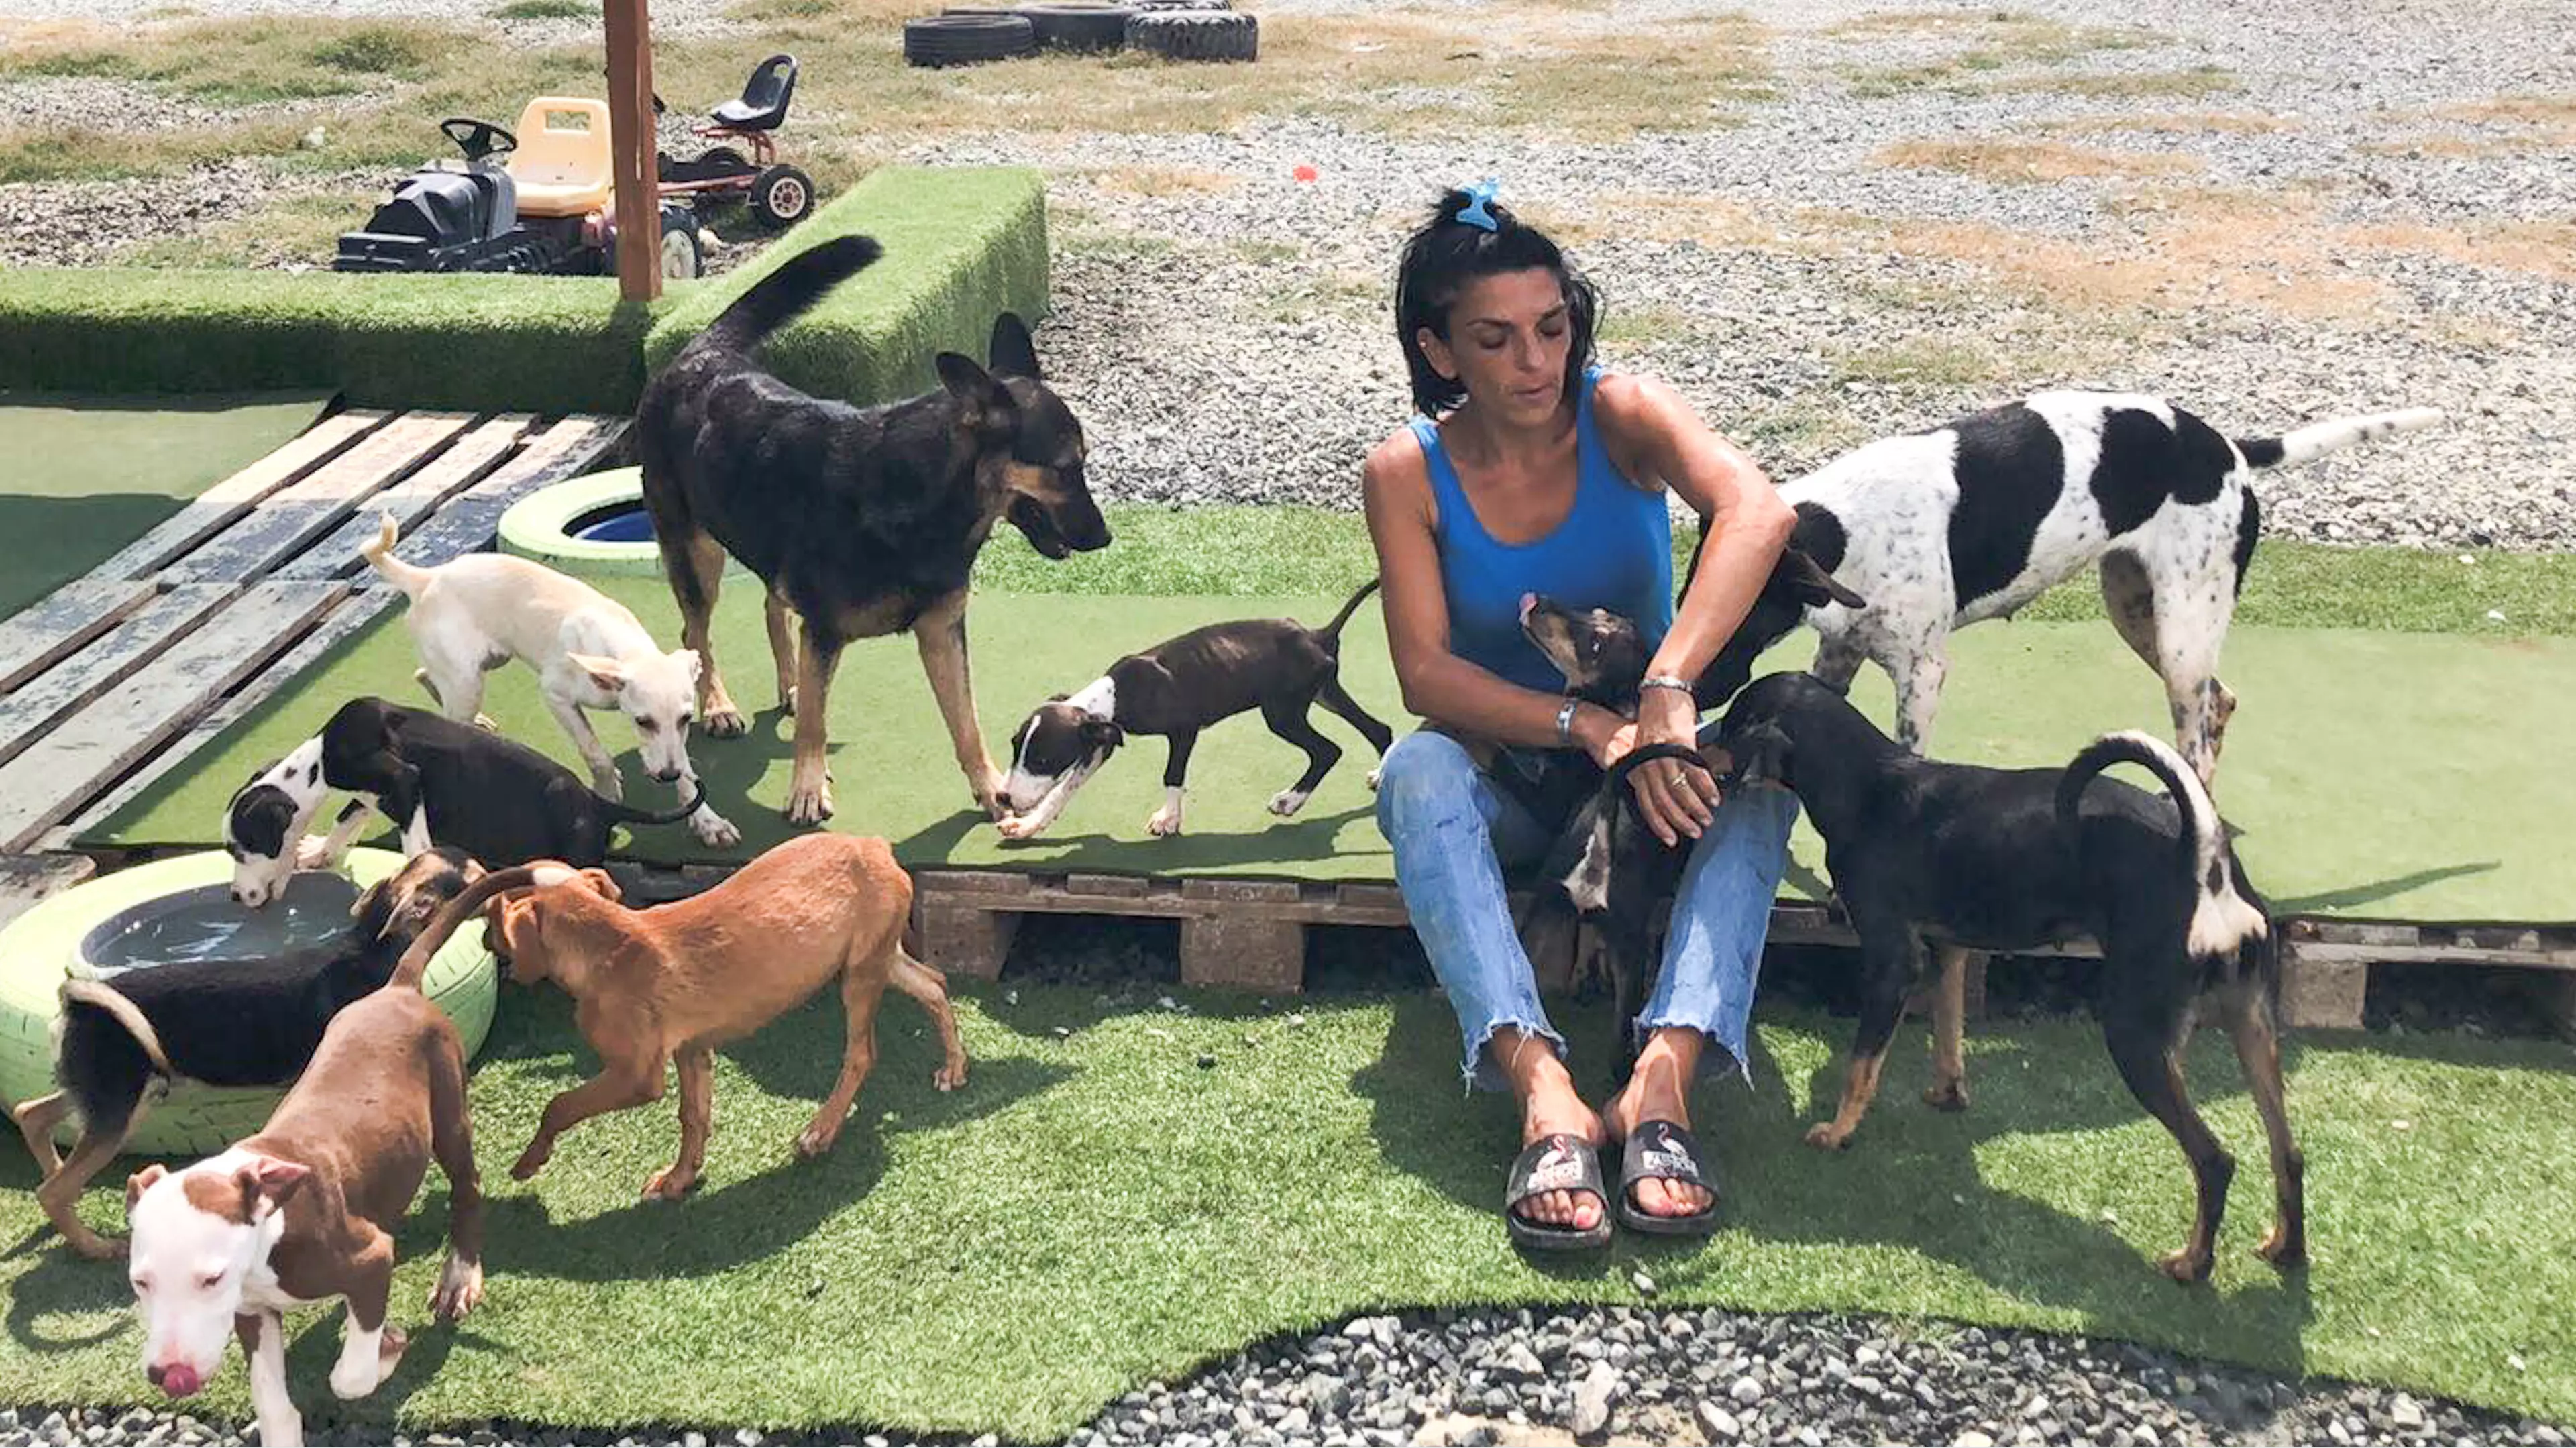 Woman Quits Her Job And Spends Life Savings Looking After Stray Dogs